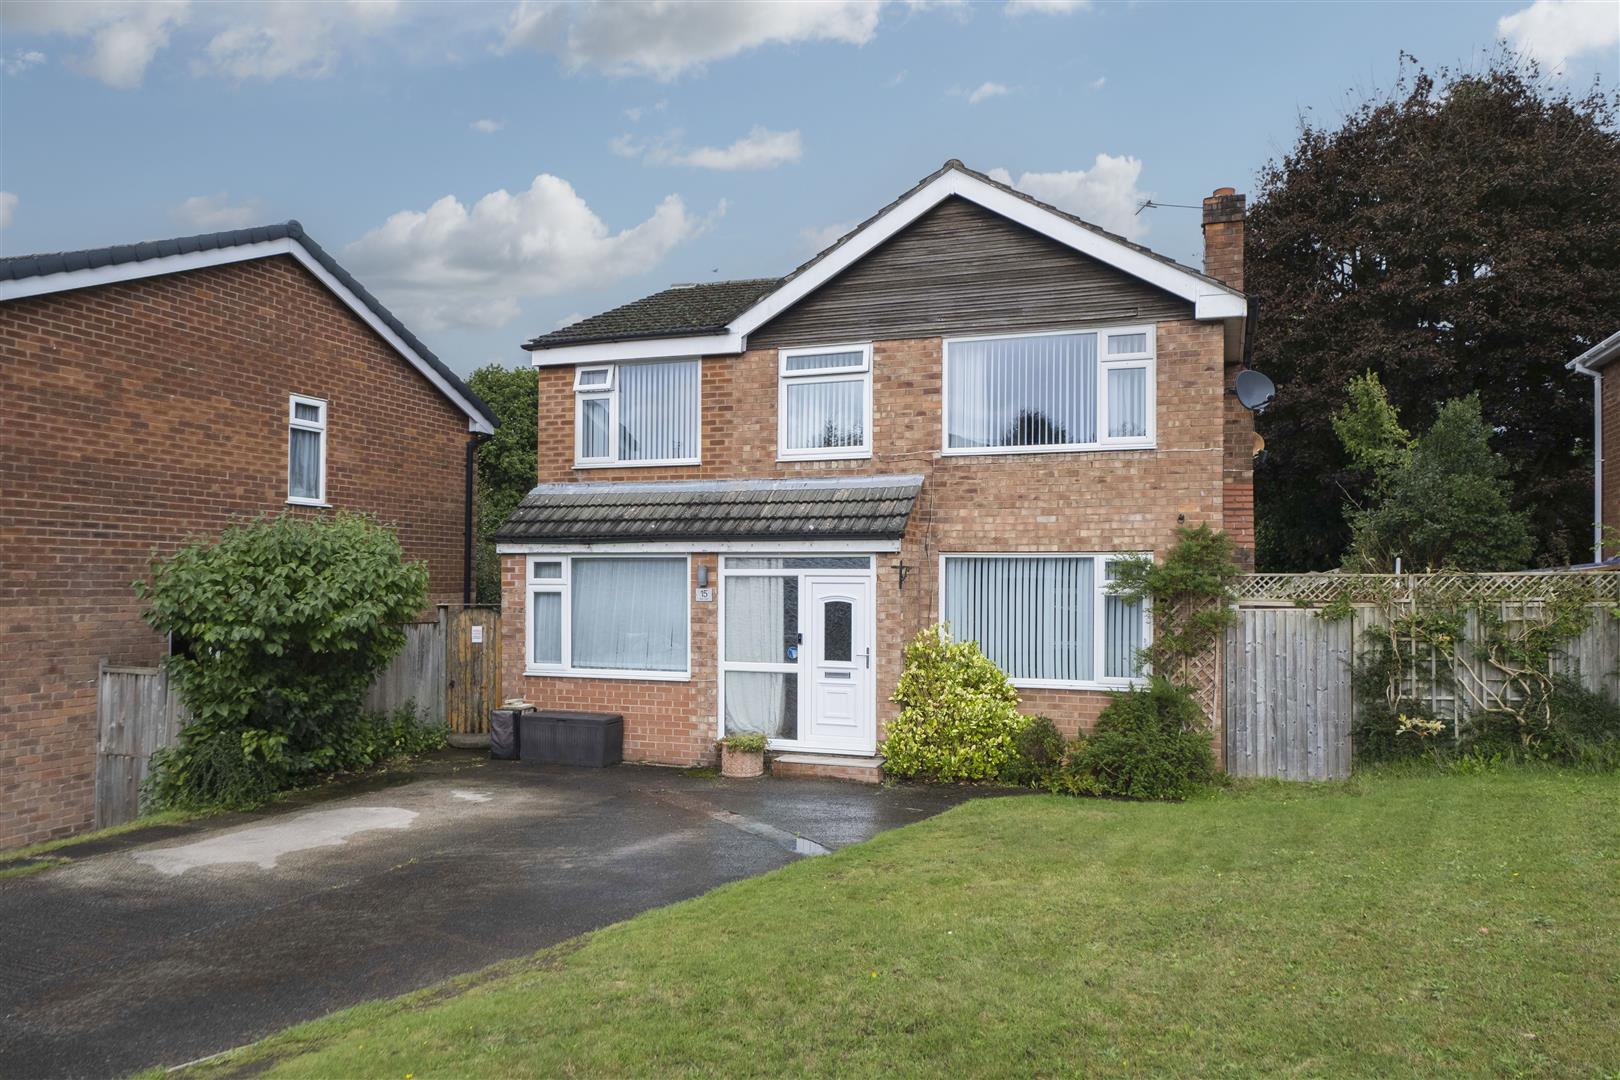 4 bedroom  Detached House for Sale in Northwich